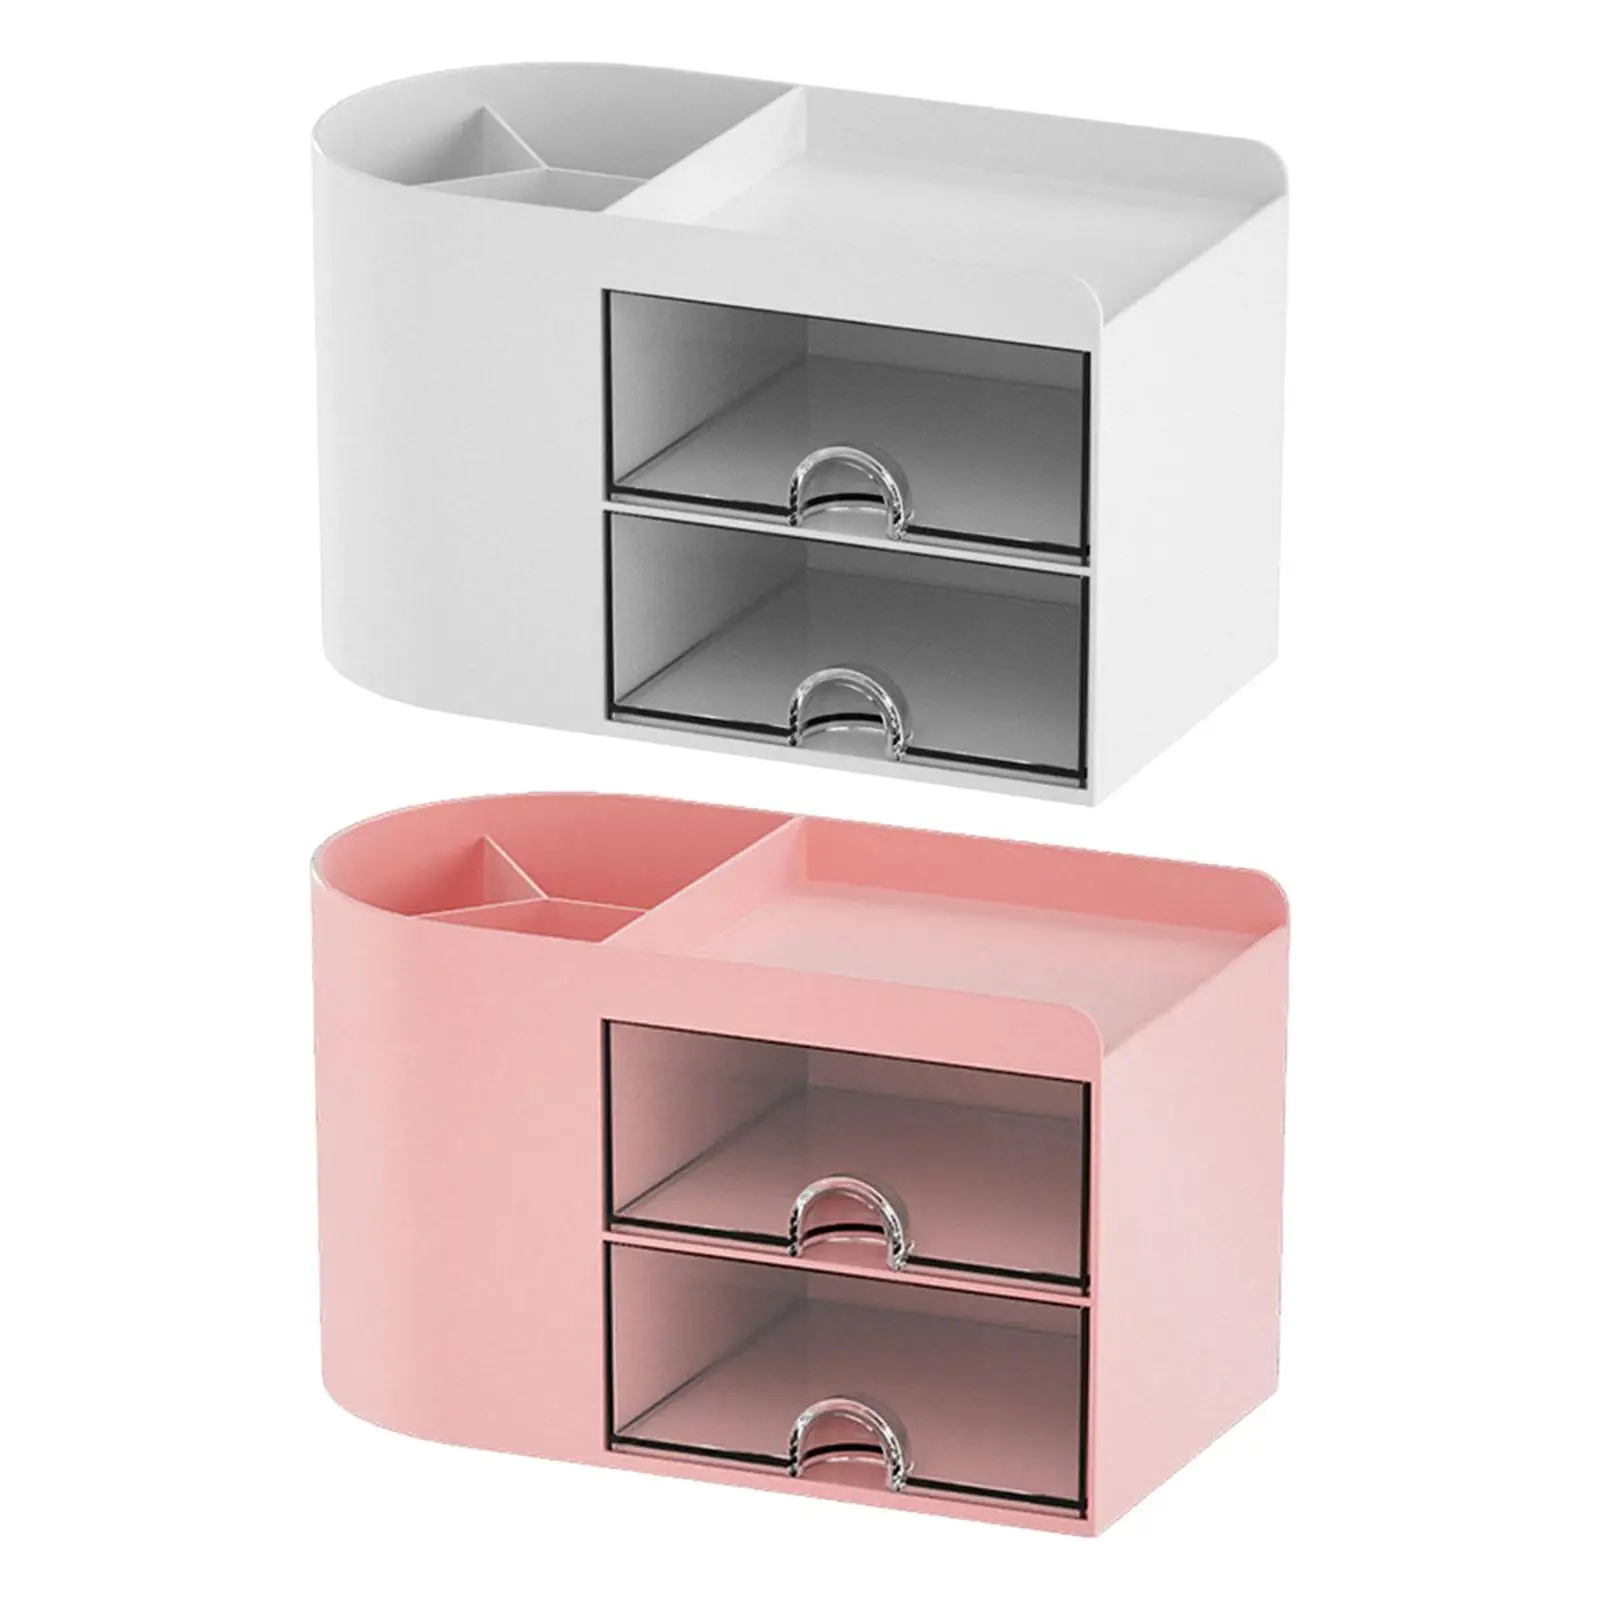 for Smartphone and Other Small Items Makeup Storage Drawer with Drawers Pen Holder Office Desk Organizer for Dresser Drawers